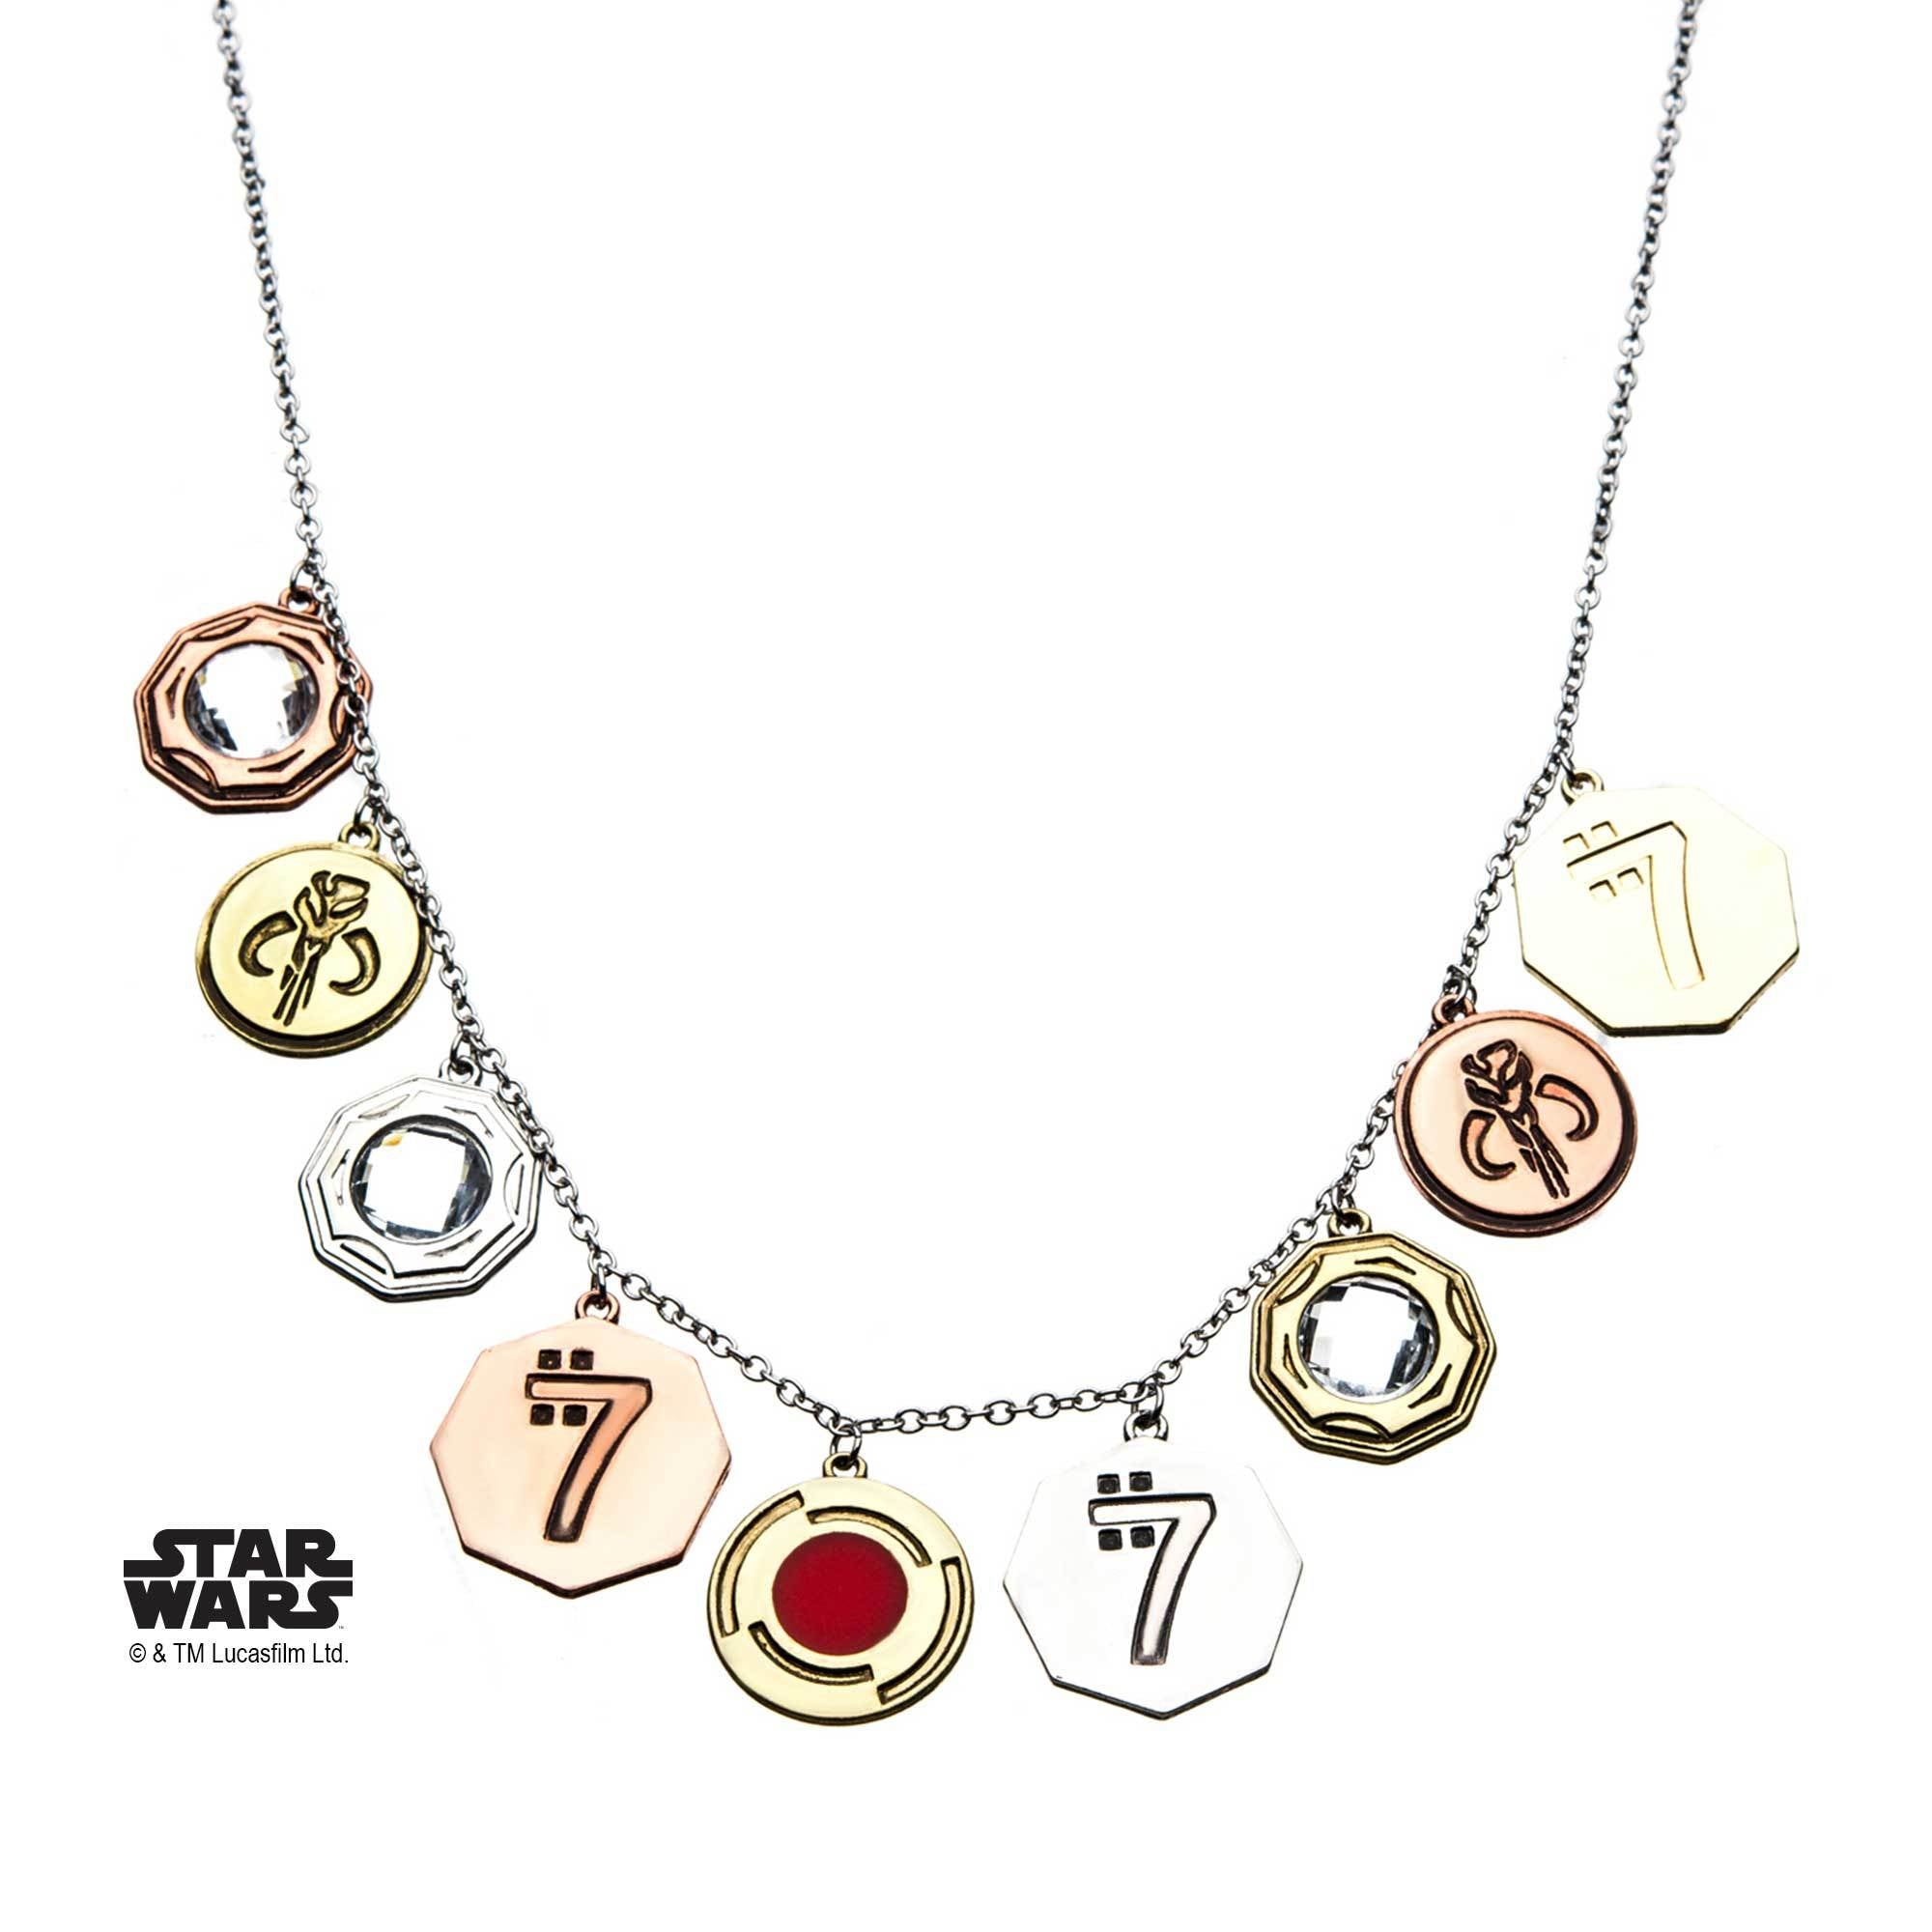 Star Wars Sabacc Coin Bling Necklace